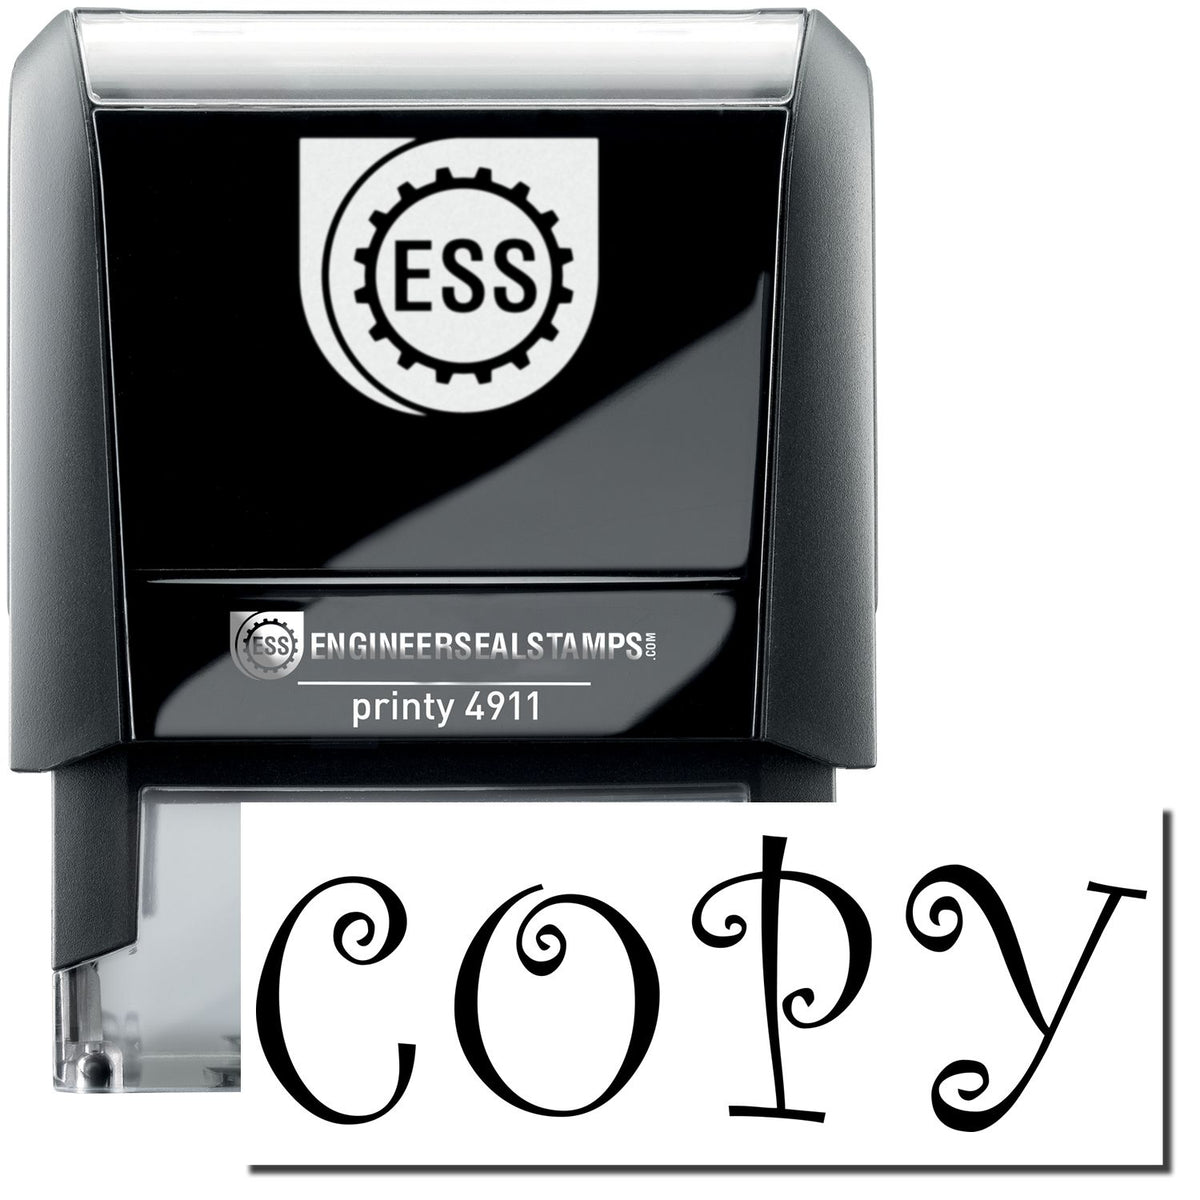 A self-inking stamp with a stamped image showing how the text &quot;COPY&quot; in a curly font is displayed after stamping.